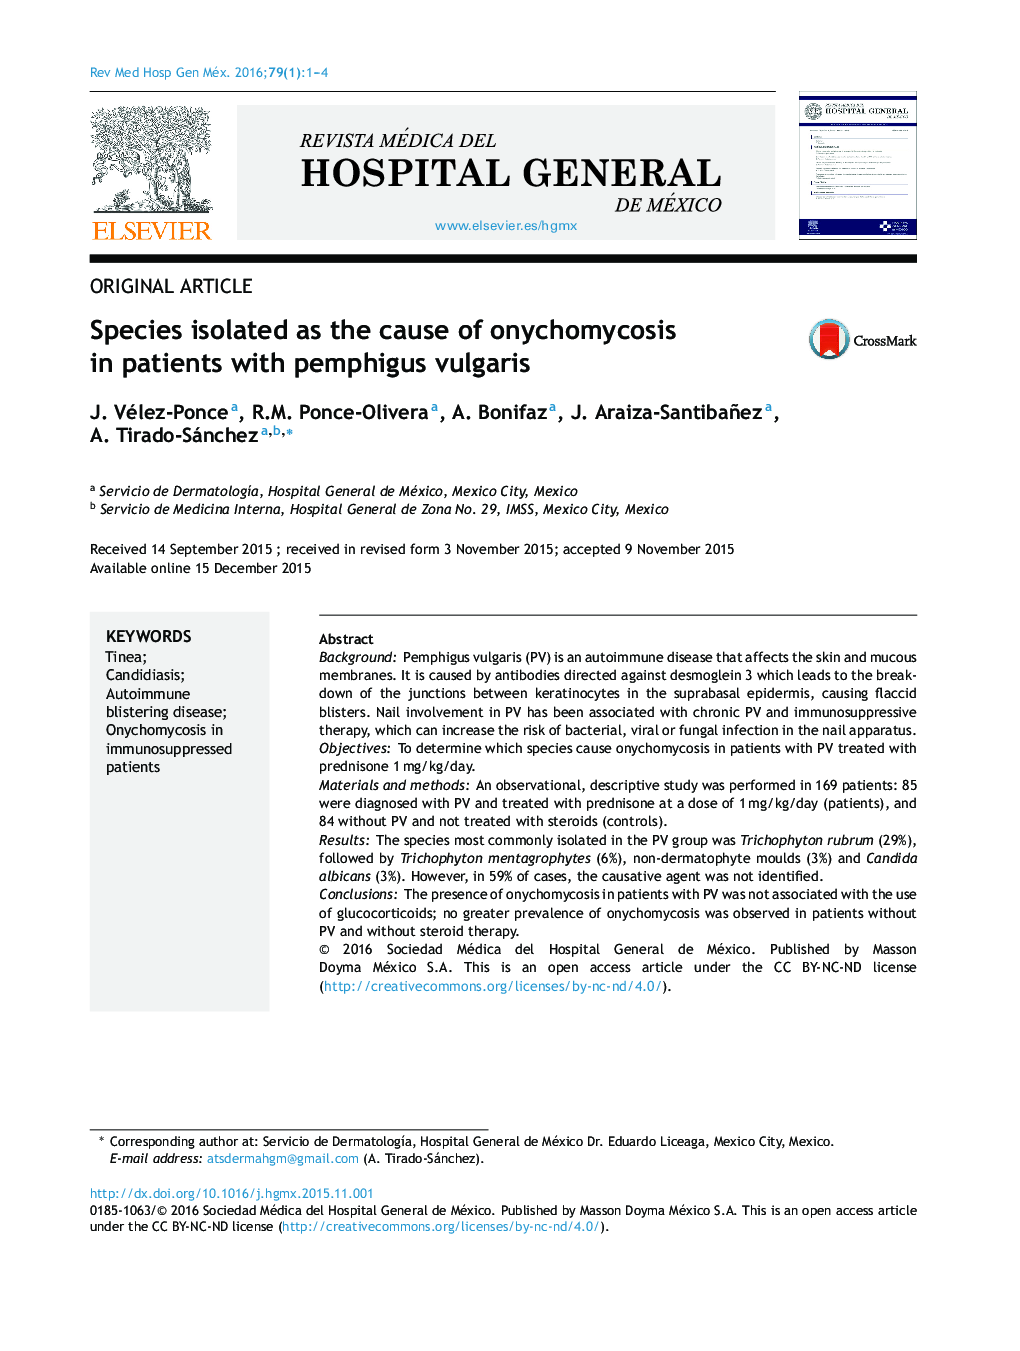 Species isolated as the cause of onychomycosis in patients with pemphigus vulgaris